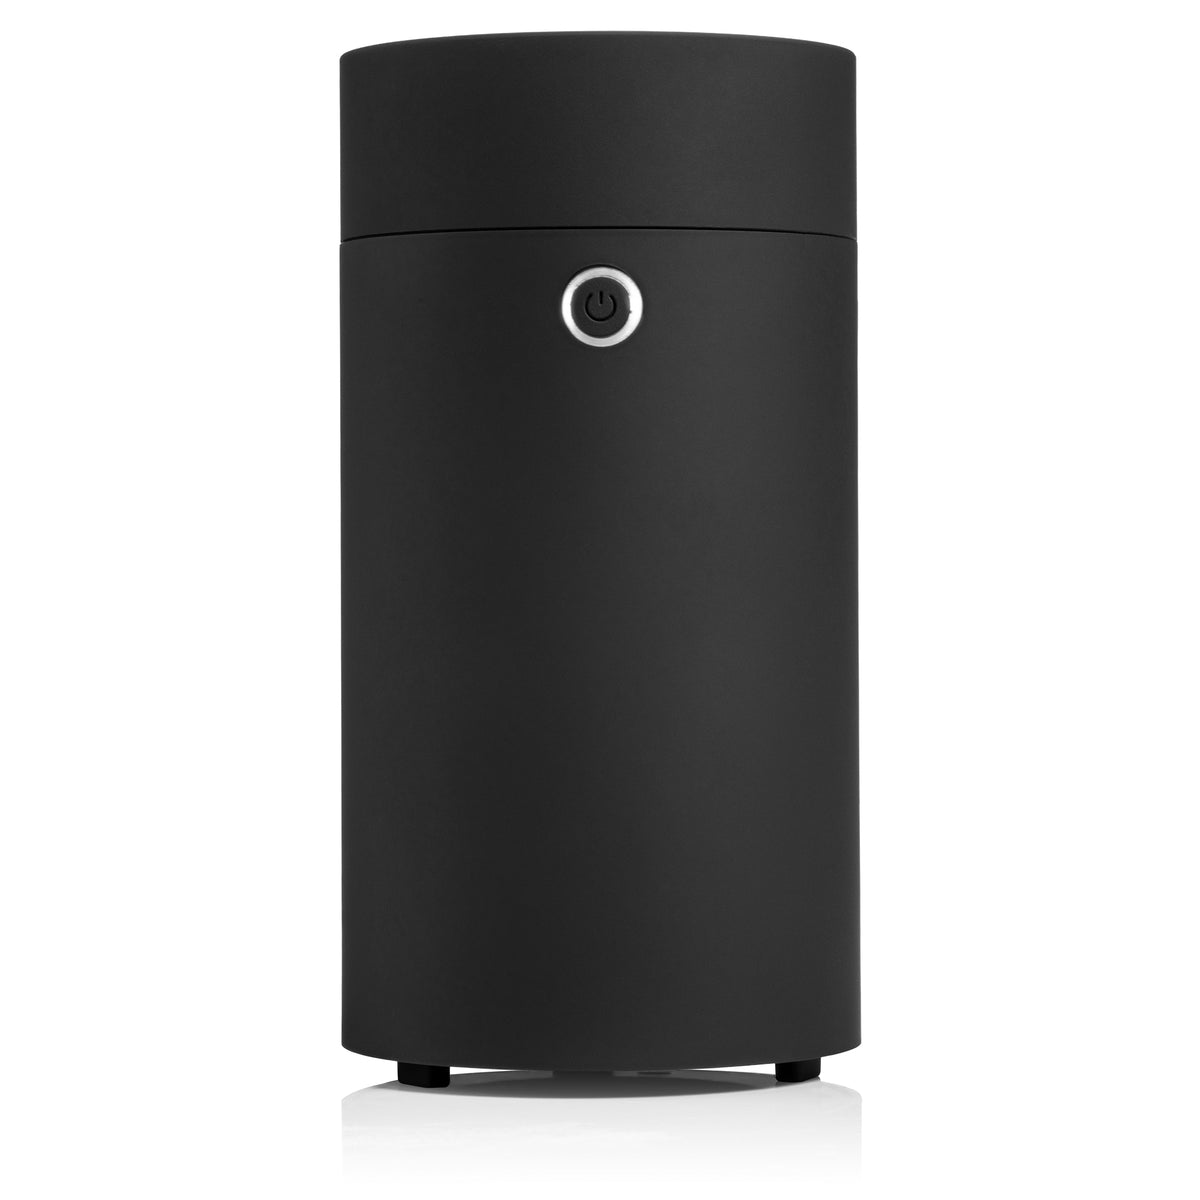 Campo Beauty Travel Ultrasonic Essential Oil Diffuser - MATTE BLACK Breathe beauty with the intention transform the mood &amp; purify the air of any space on the go with this jet-set USB-powered diffuser that streams 100% natural essential oil mist. This sleek, matte black diffuser is car and hotel USB-port ready. What makes this USB-powered, take-anywhere diffuser so versatile is that it looks as sleek on your shelf at home as it does in a car cupholder. 